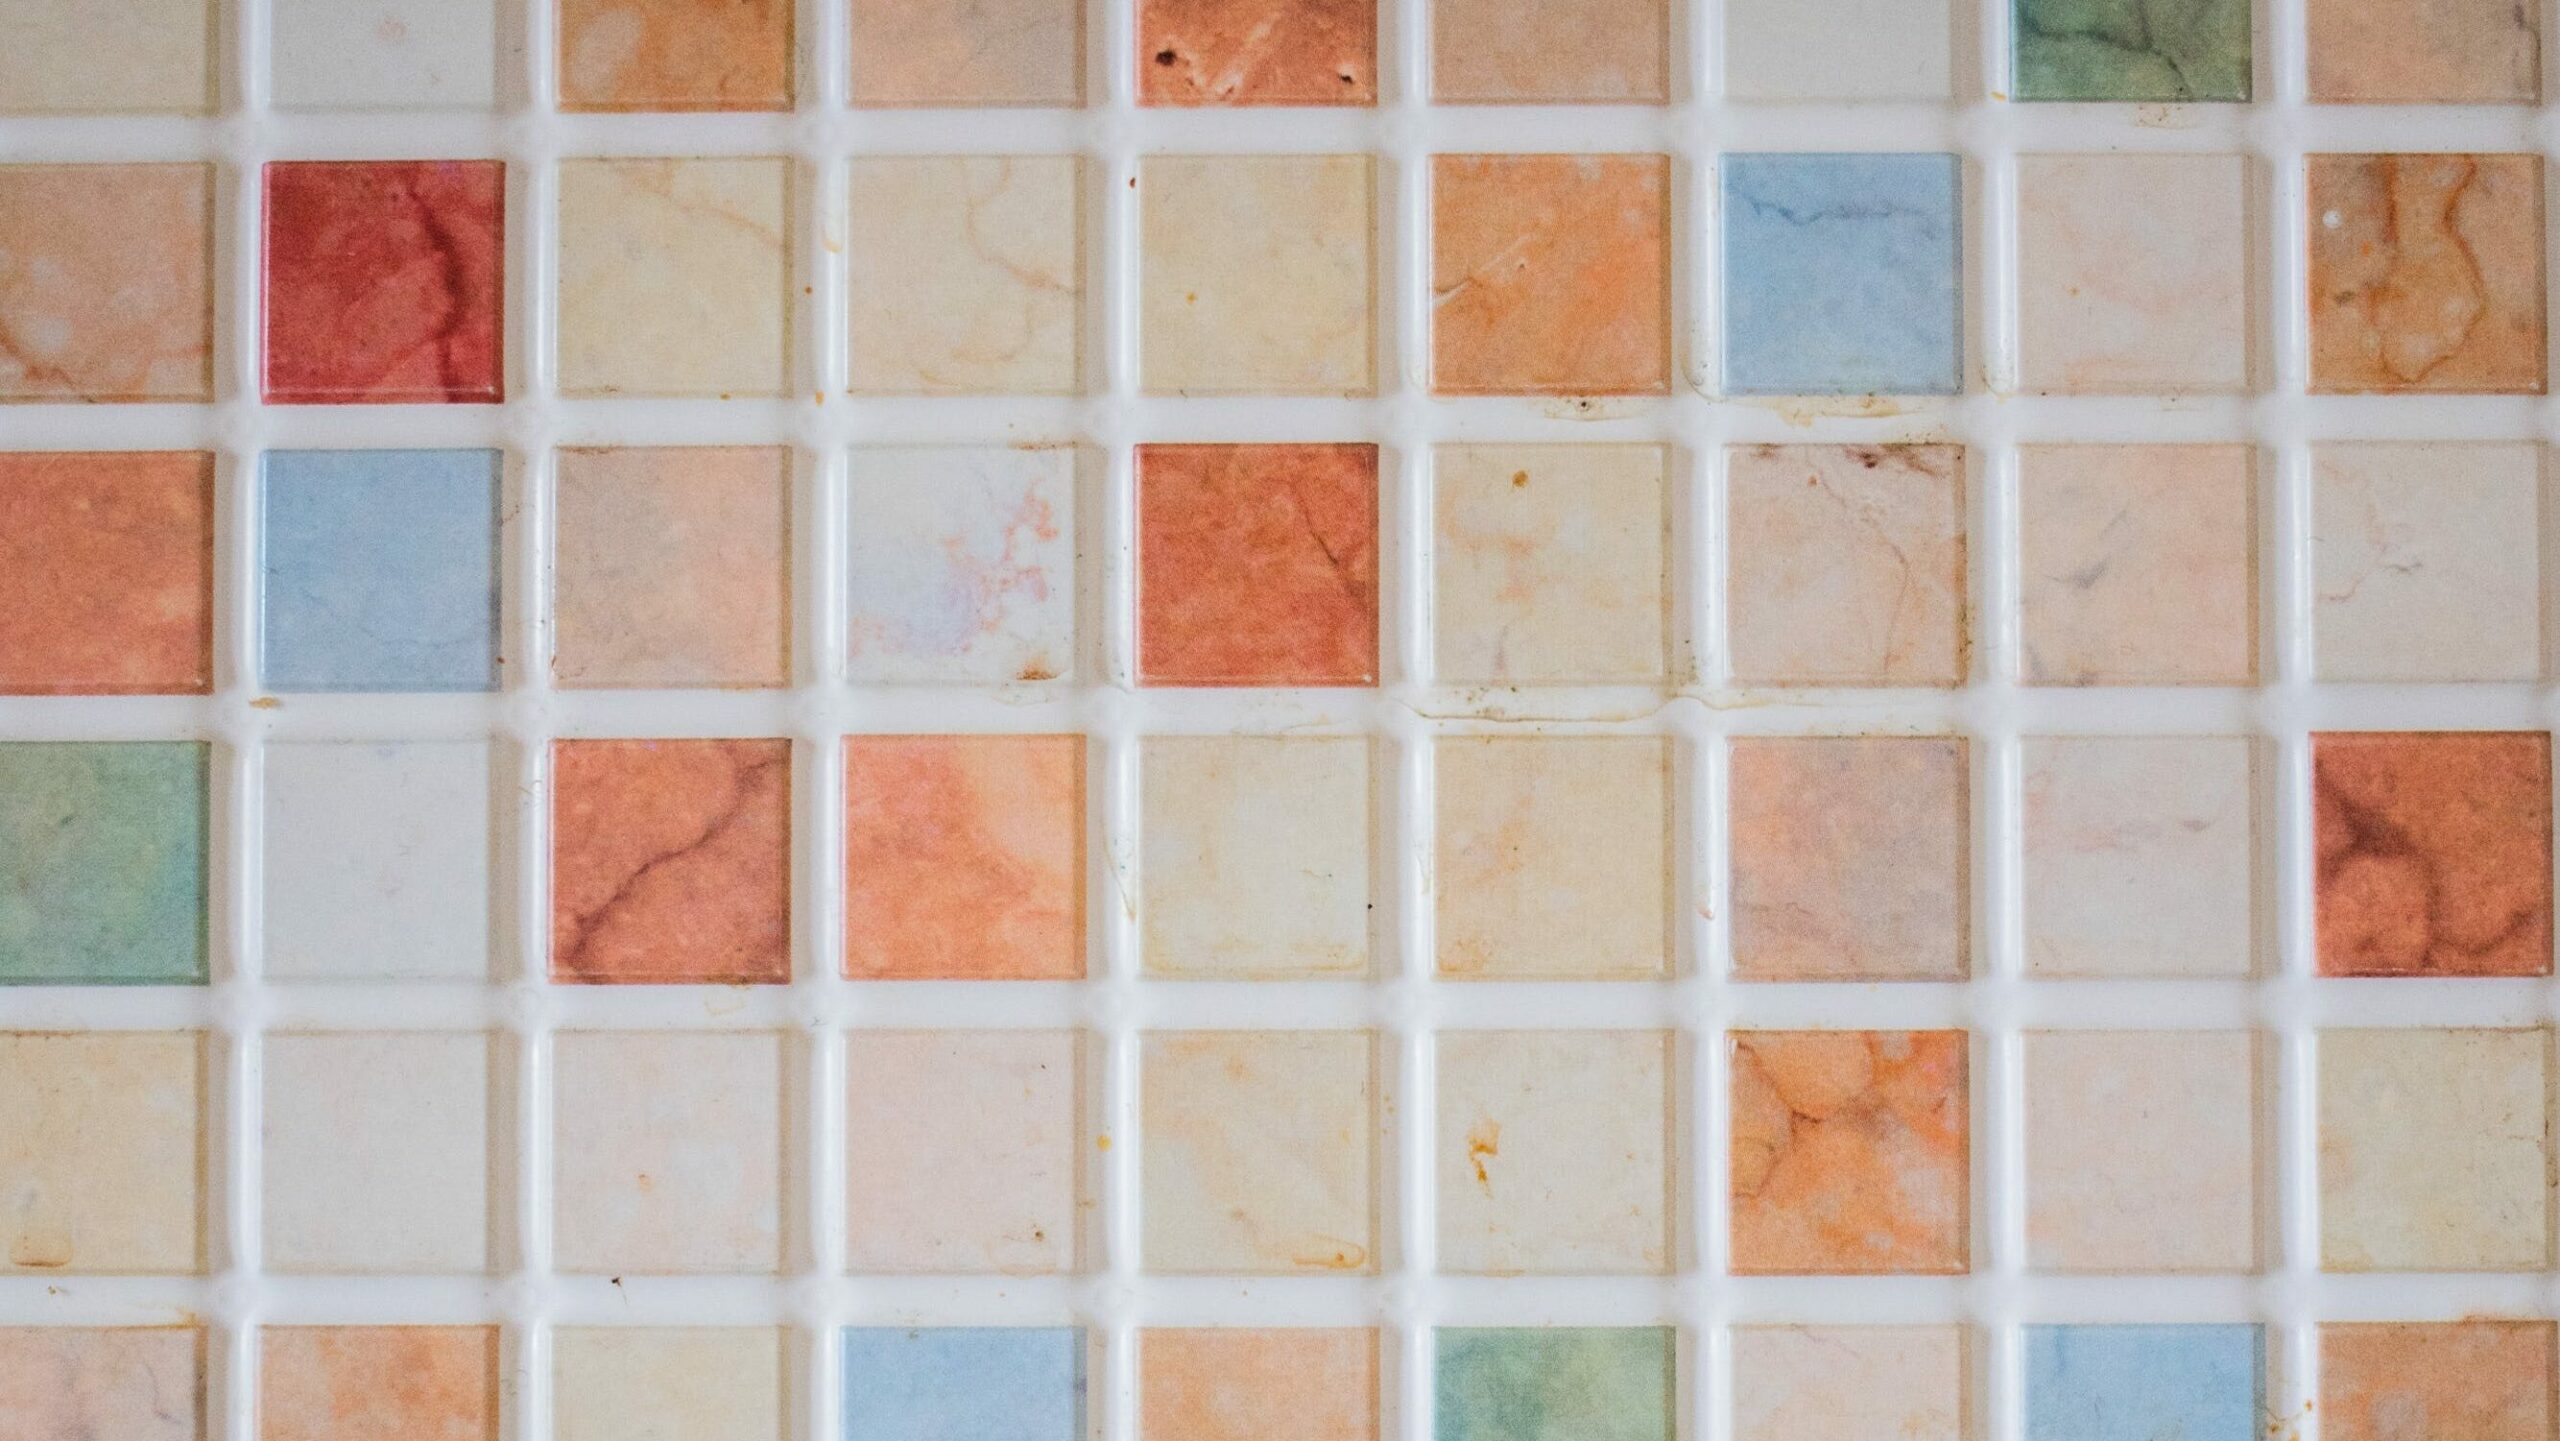 Reclaimed and recycled glass and other materials make for a captivating and colorful tile design.